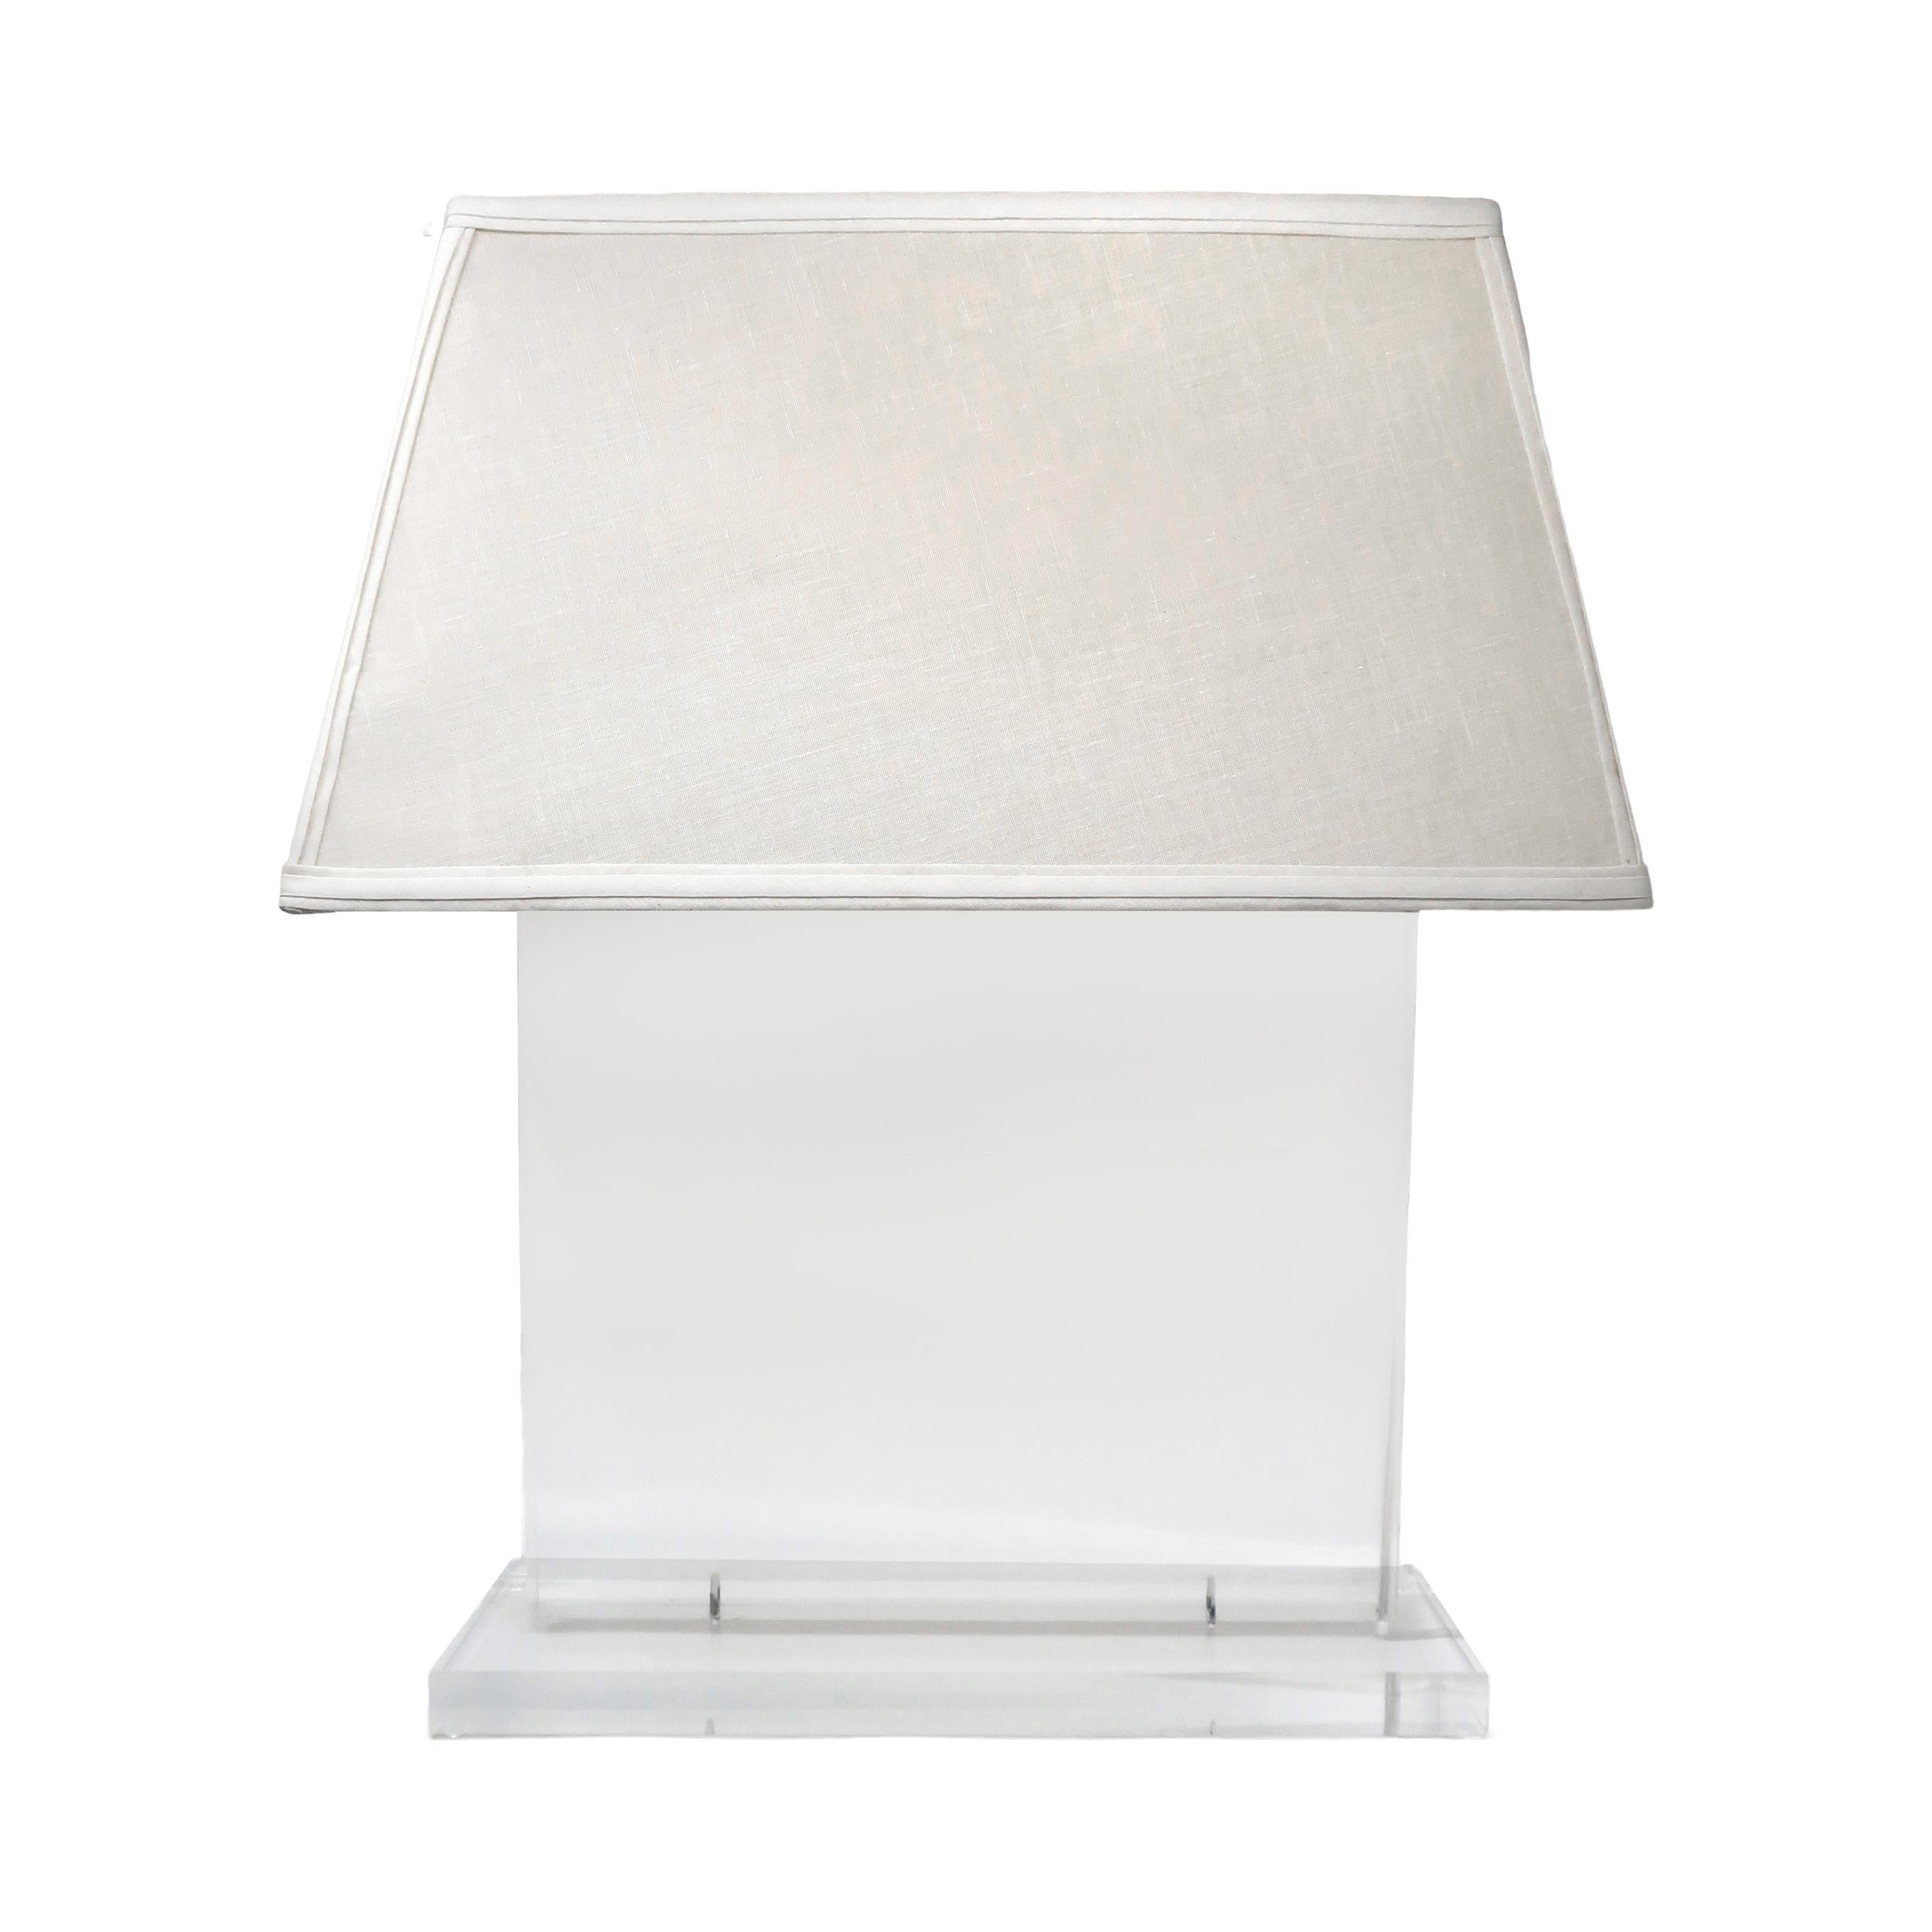 A beautiful 1970s Italian Modern lucite table lamp with transparent base, slim rectangular body, and rectangular angled fabric-covered shade. Fantastically minimalist with a slim profile that glows when the lamp is turned on.

In very good